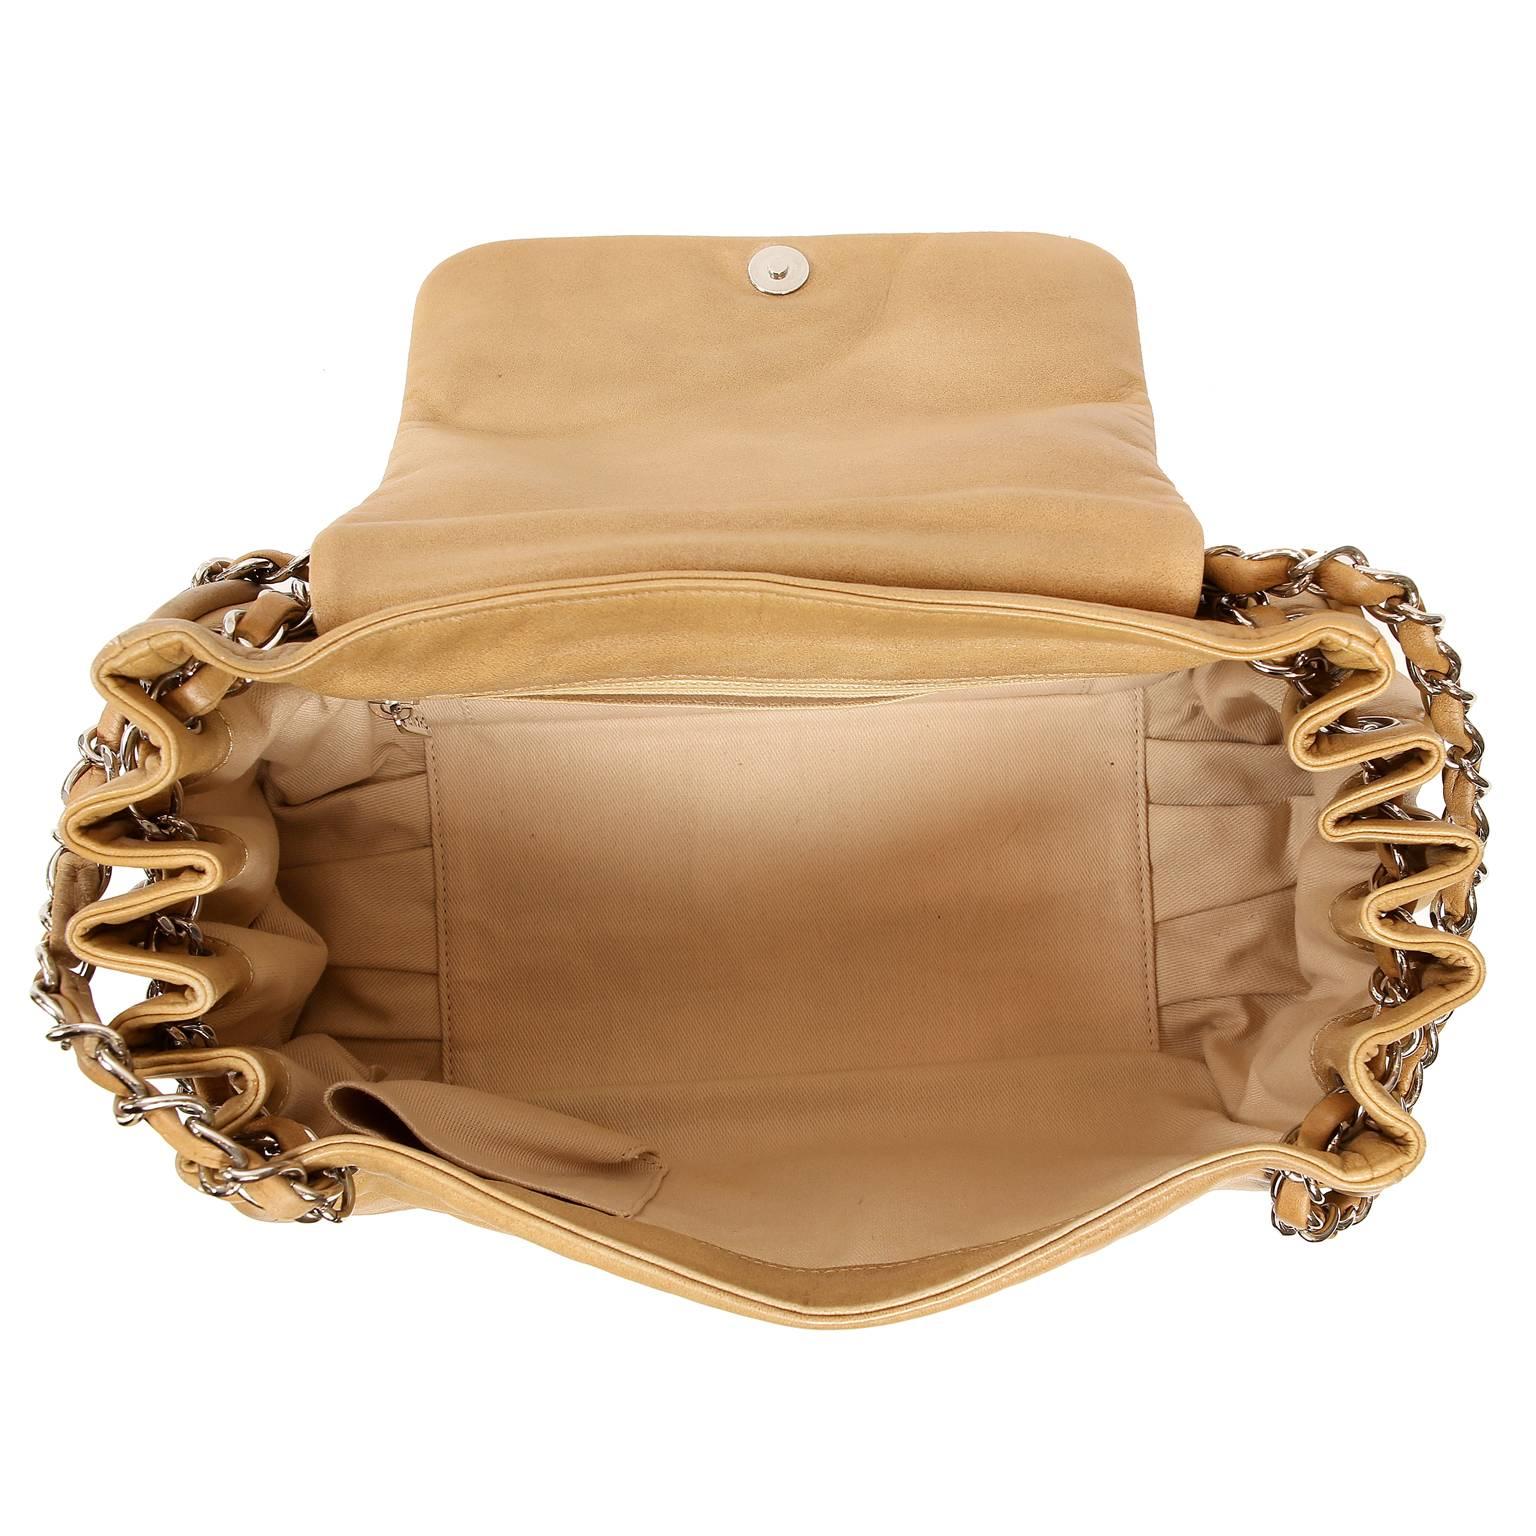 Chanel Beige Leather Accordion Flap Bag For Sale 4